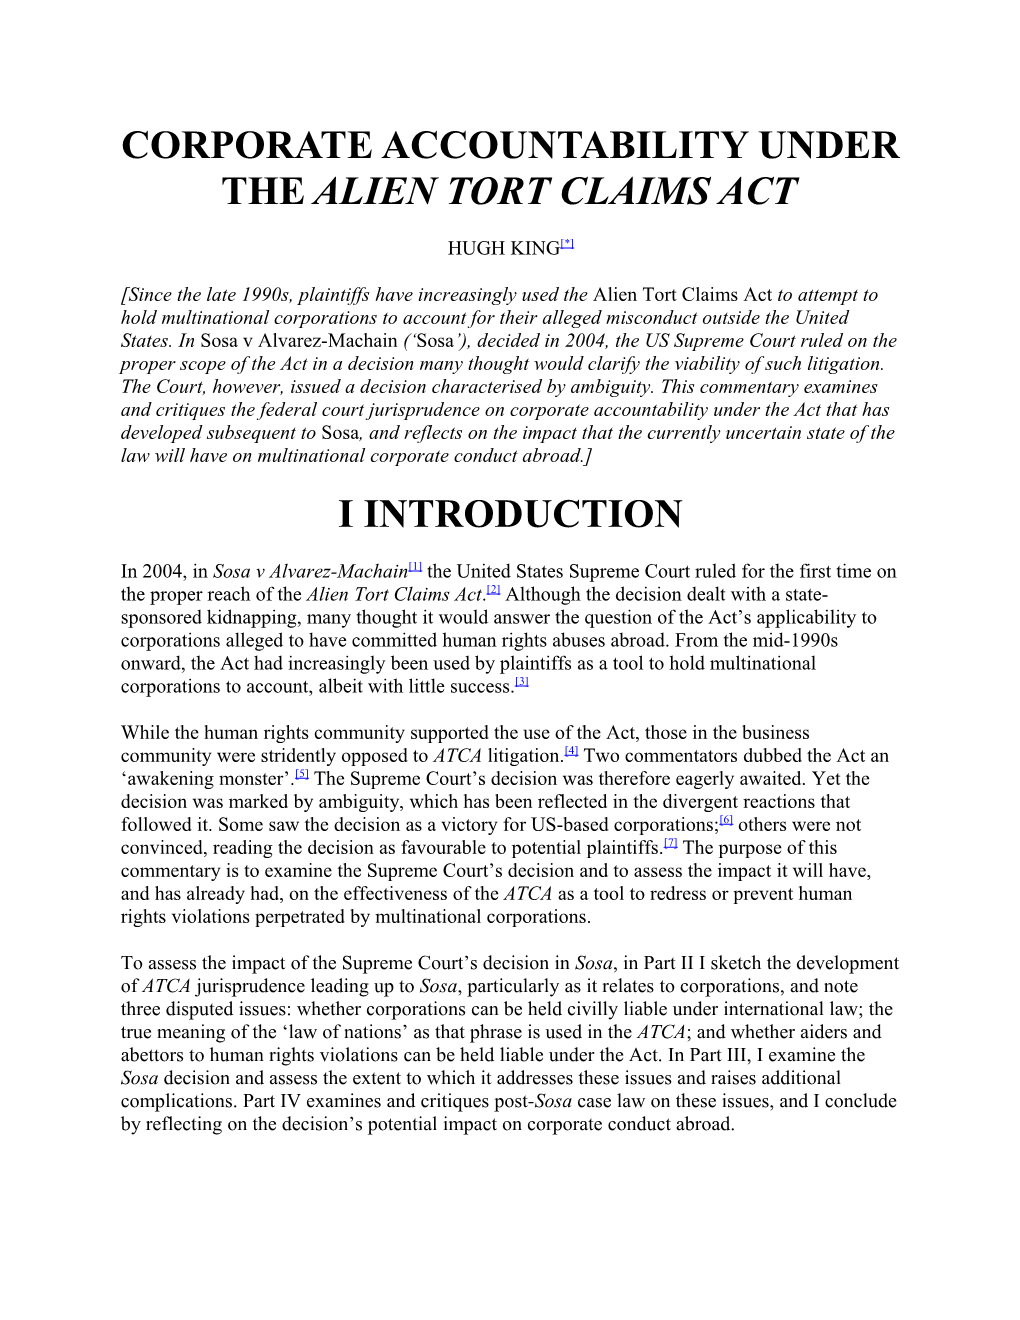 Corporate Accountability Under the Alien Tort Claims Act